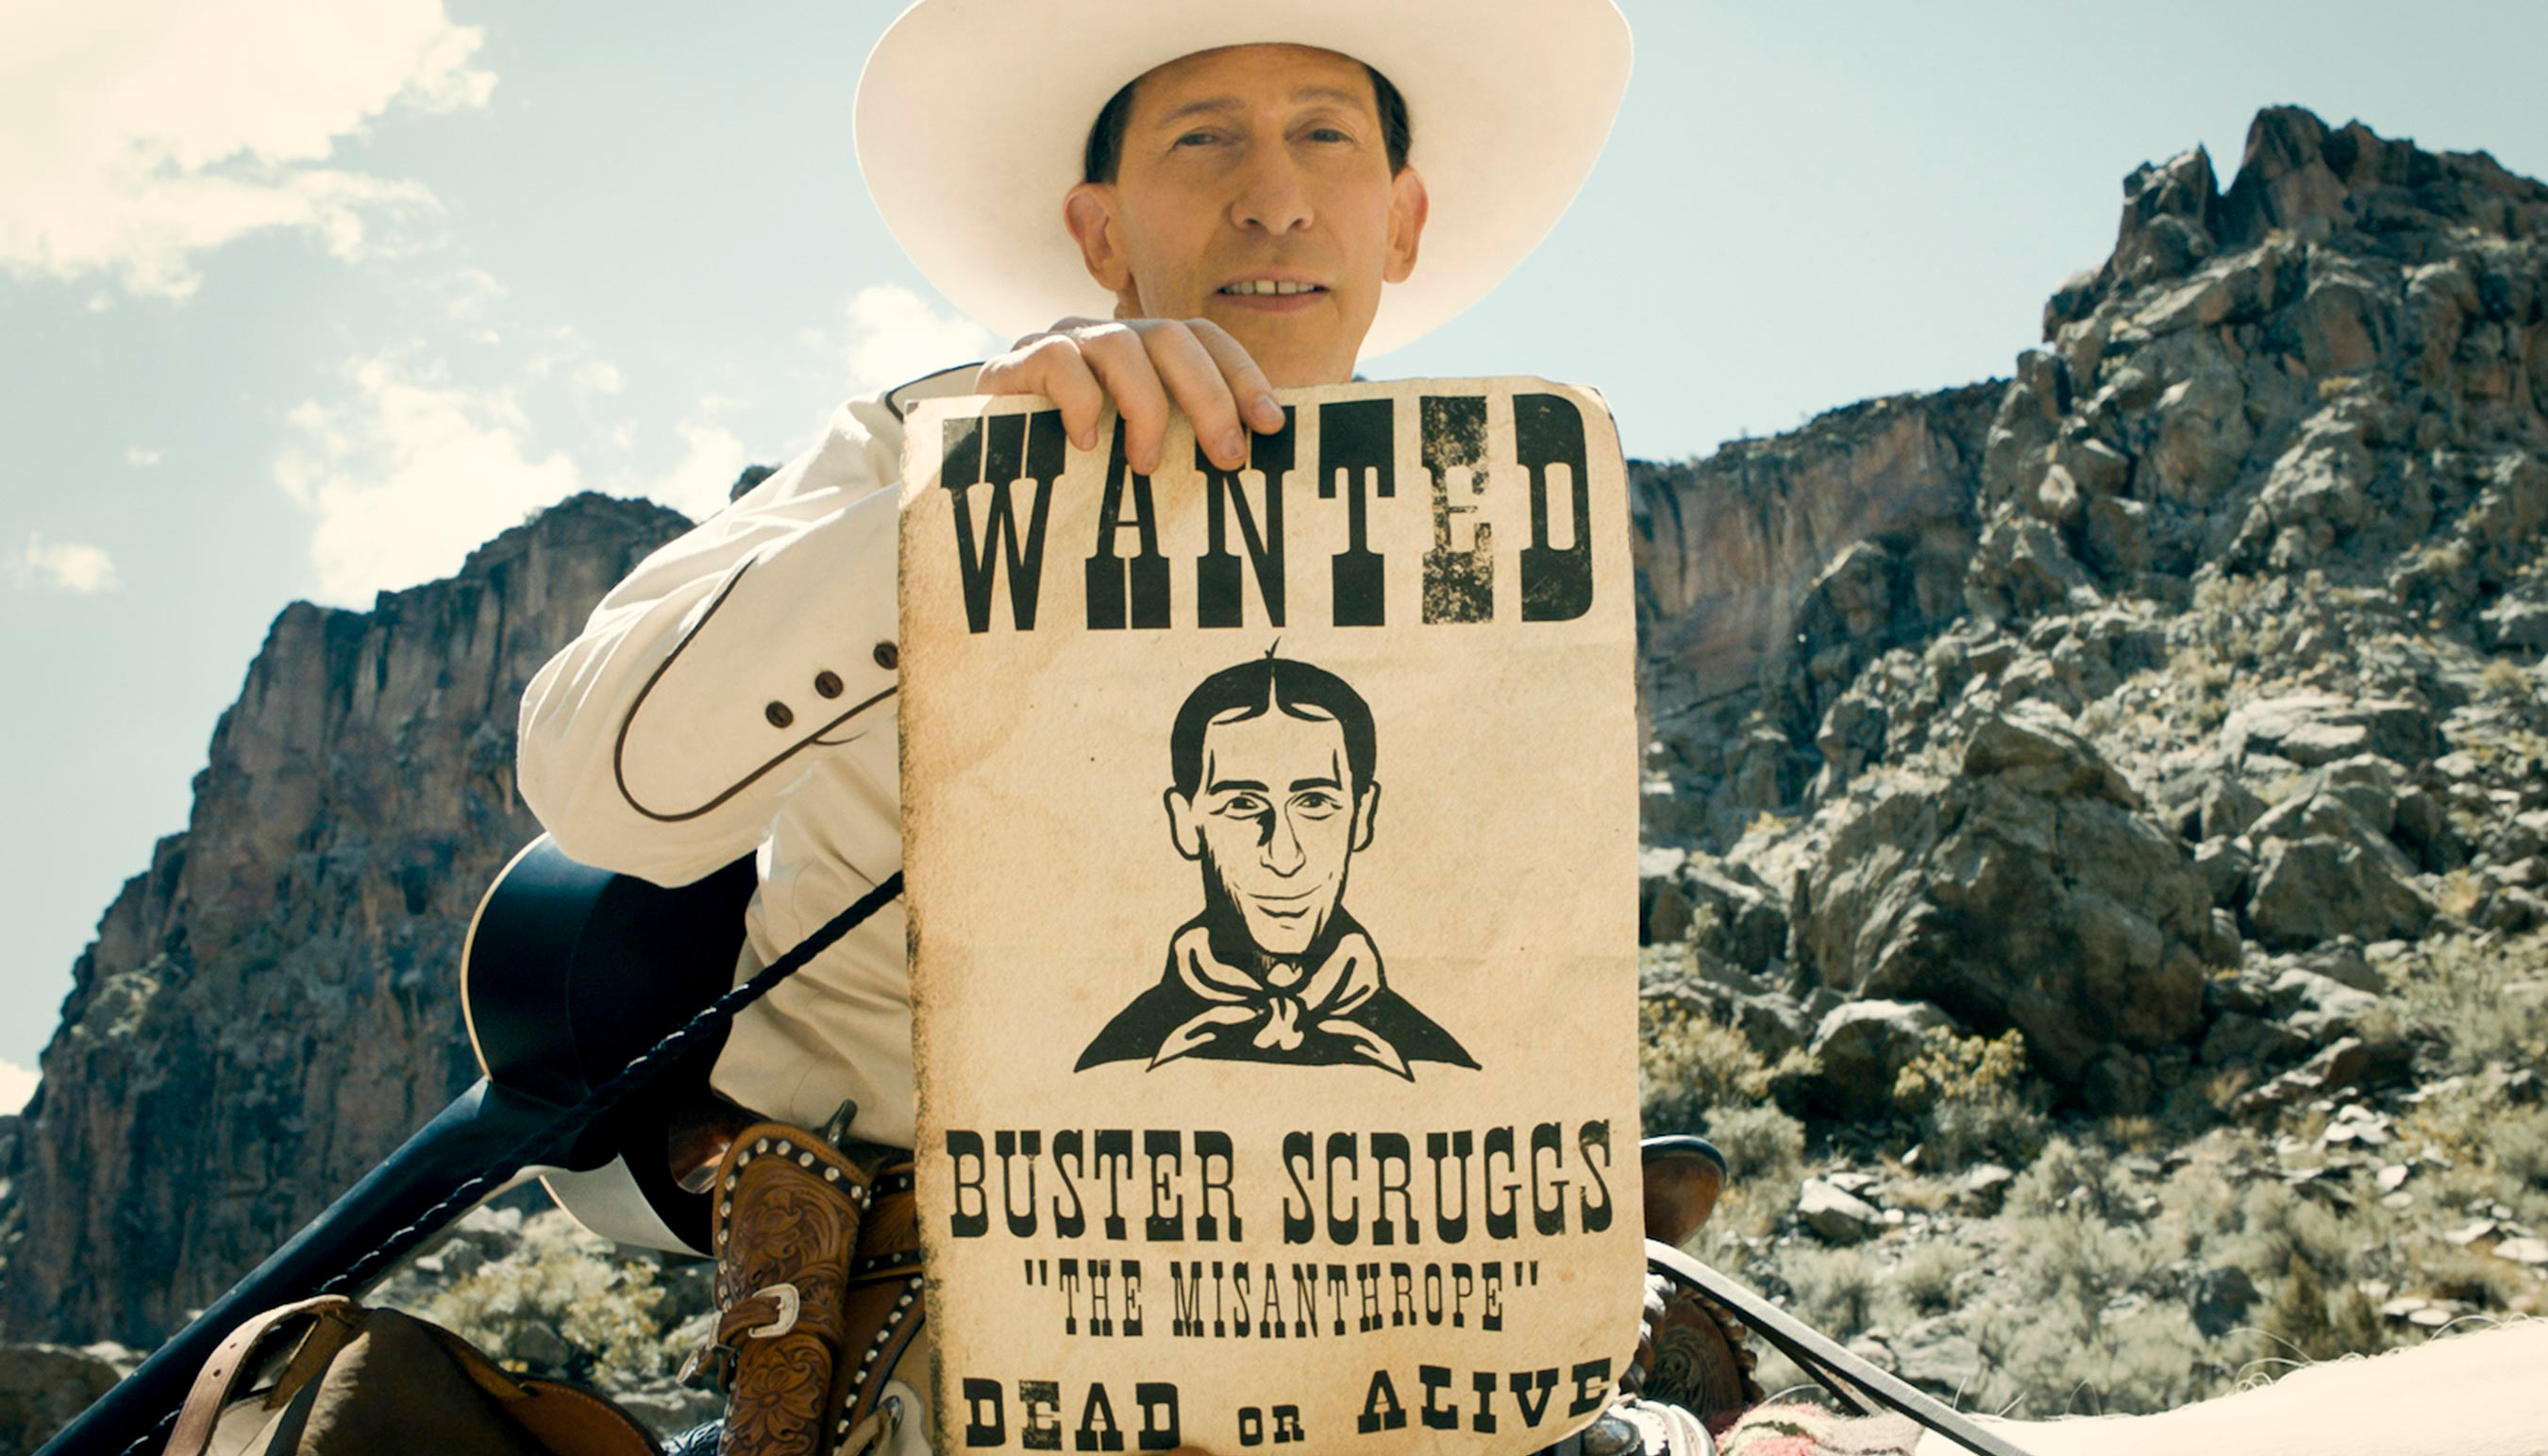 TUMP [EP#301 – THE BALLAD OF BUSTER SCRUGGS]